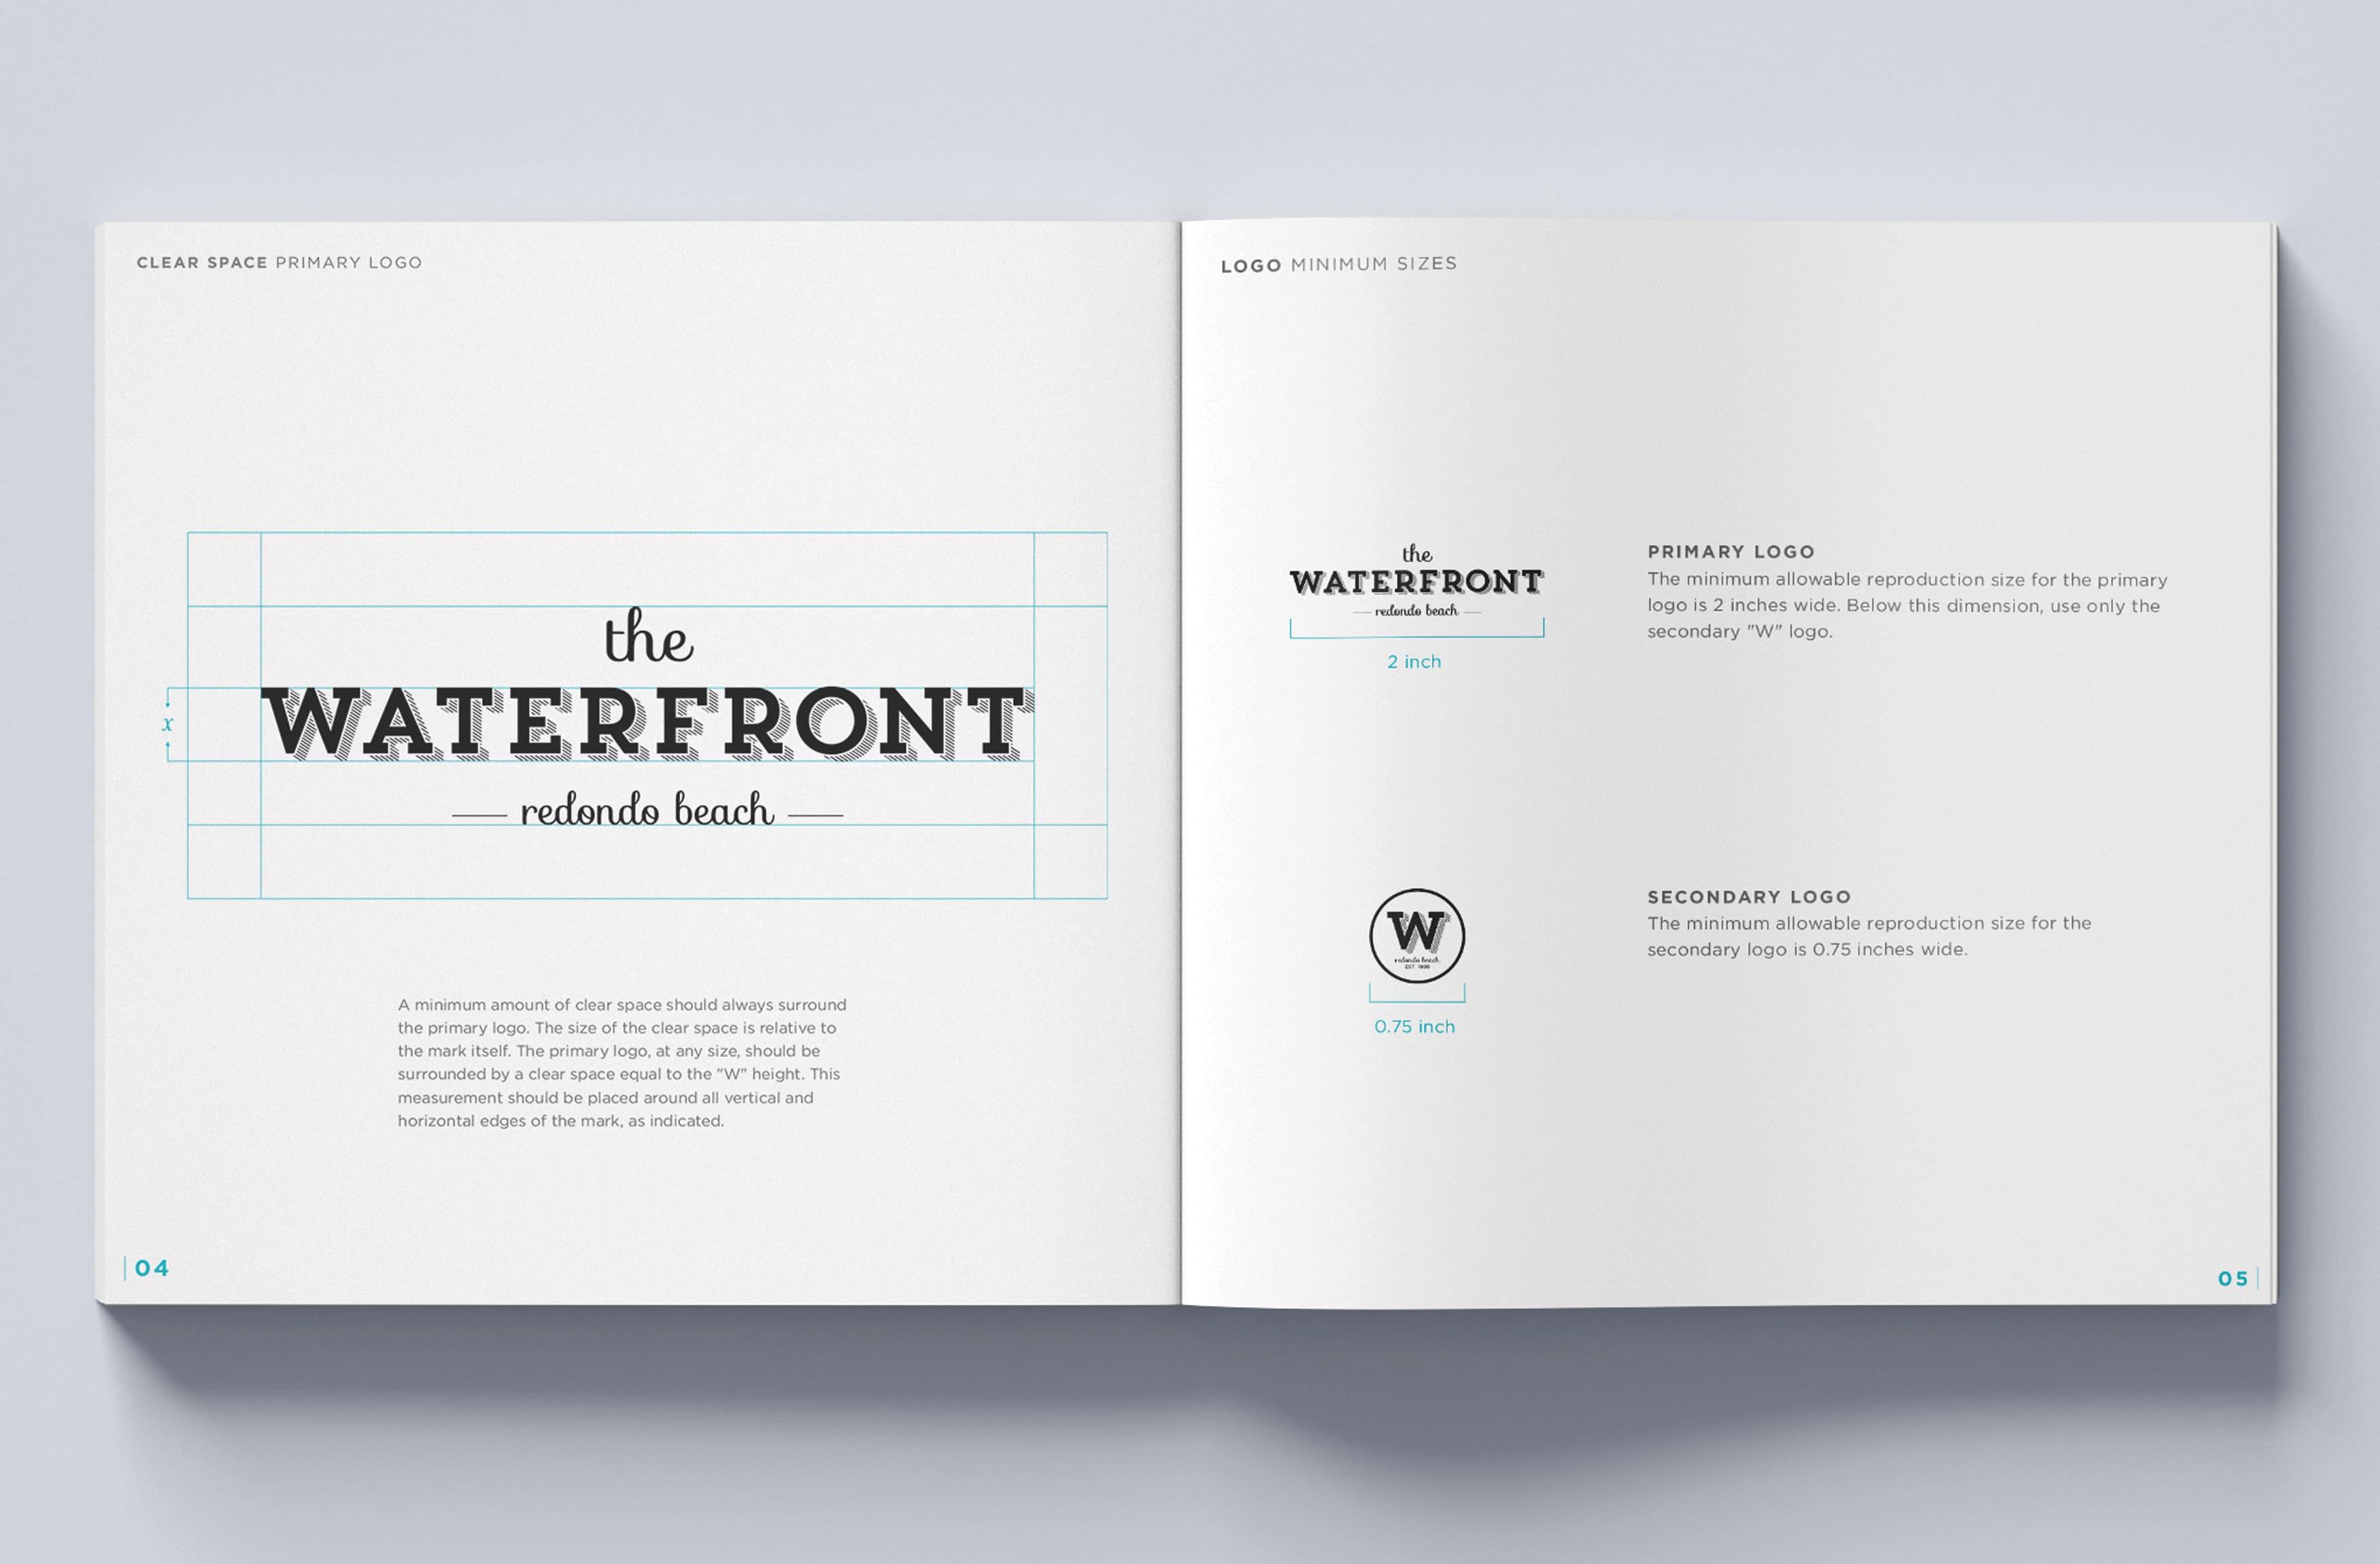 RSM Design worked with CenterCal Properties to develop a brand strategy and voice for The Waterfront, a mixed-use project in Redondo Beach, California. Brand Style Guide.